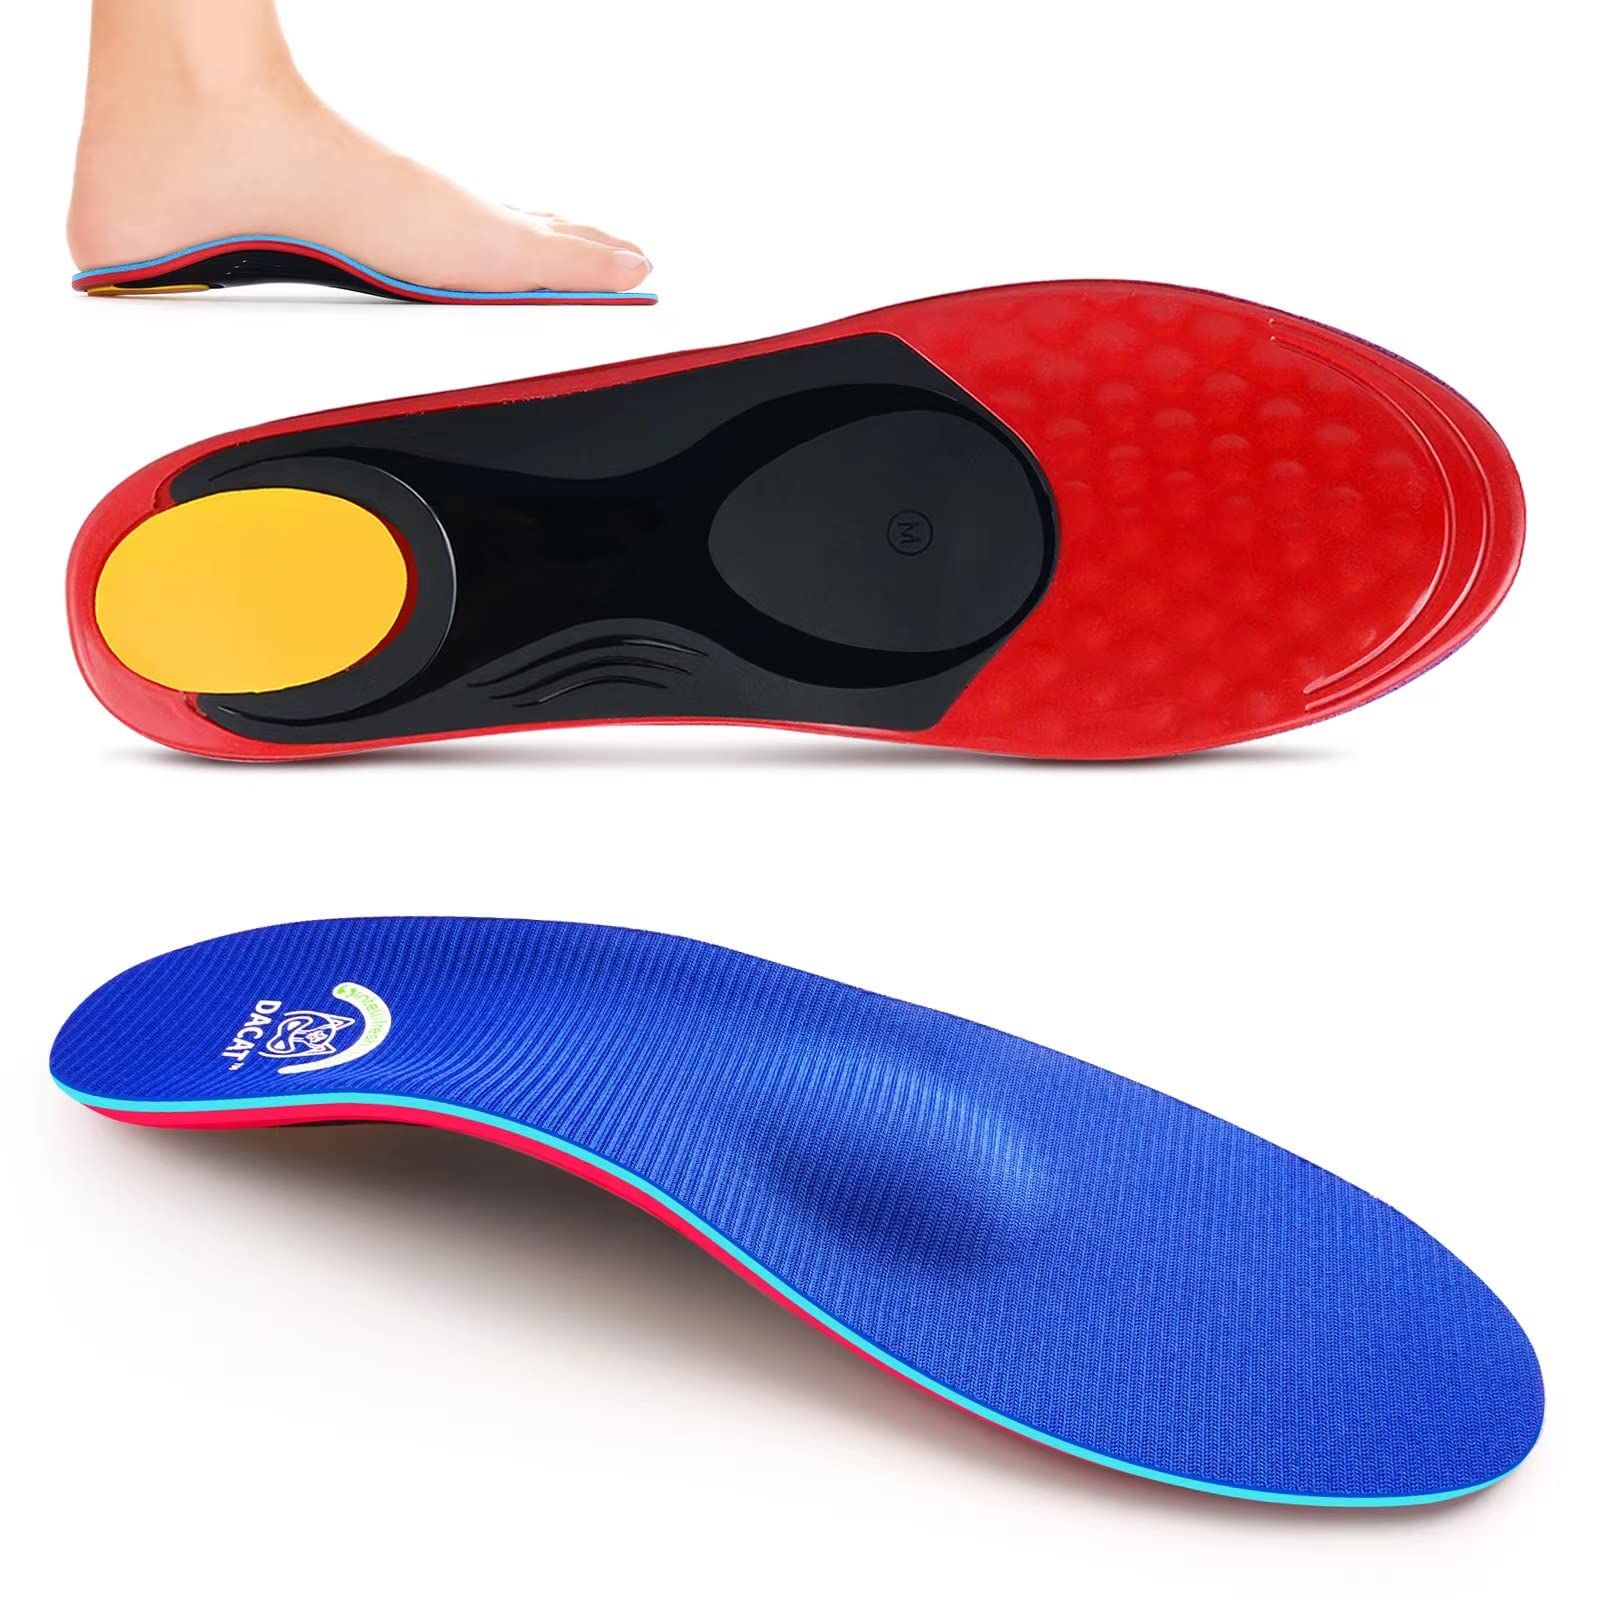 Orthotic Flat Feet Arch Support Insoles - Metatarsal Orthotic Insoles Arch  Supports Inserts for Metatarsalgia Plantar Fasciitis Ball of Foot Pain  Relief - Morton s Neuroma Shoe Inserts Red S:MEN(6-7.5)/WOMEN(8-9.5)